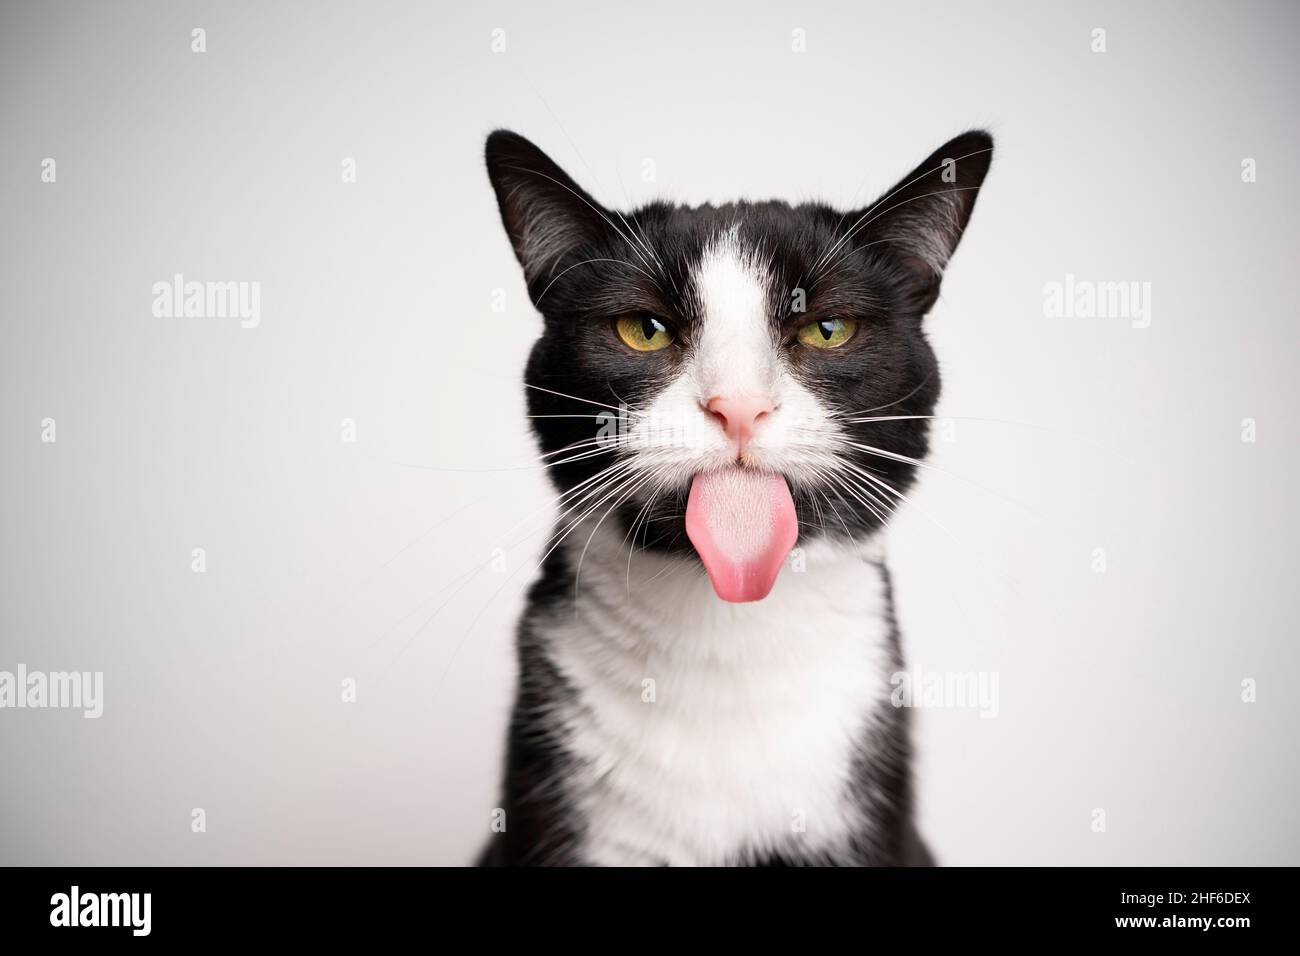 naughty black and white tuxedo cat sticking out tongue looking at camera on white background with copy space Stock Photo